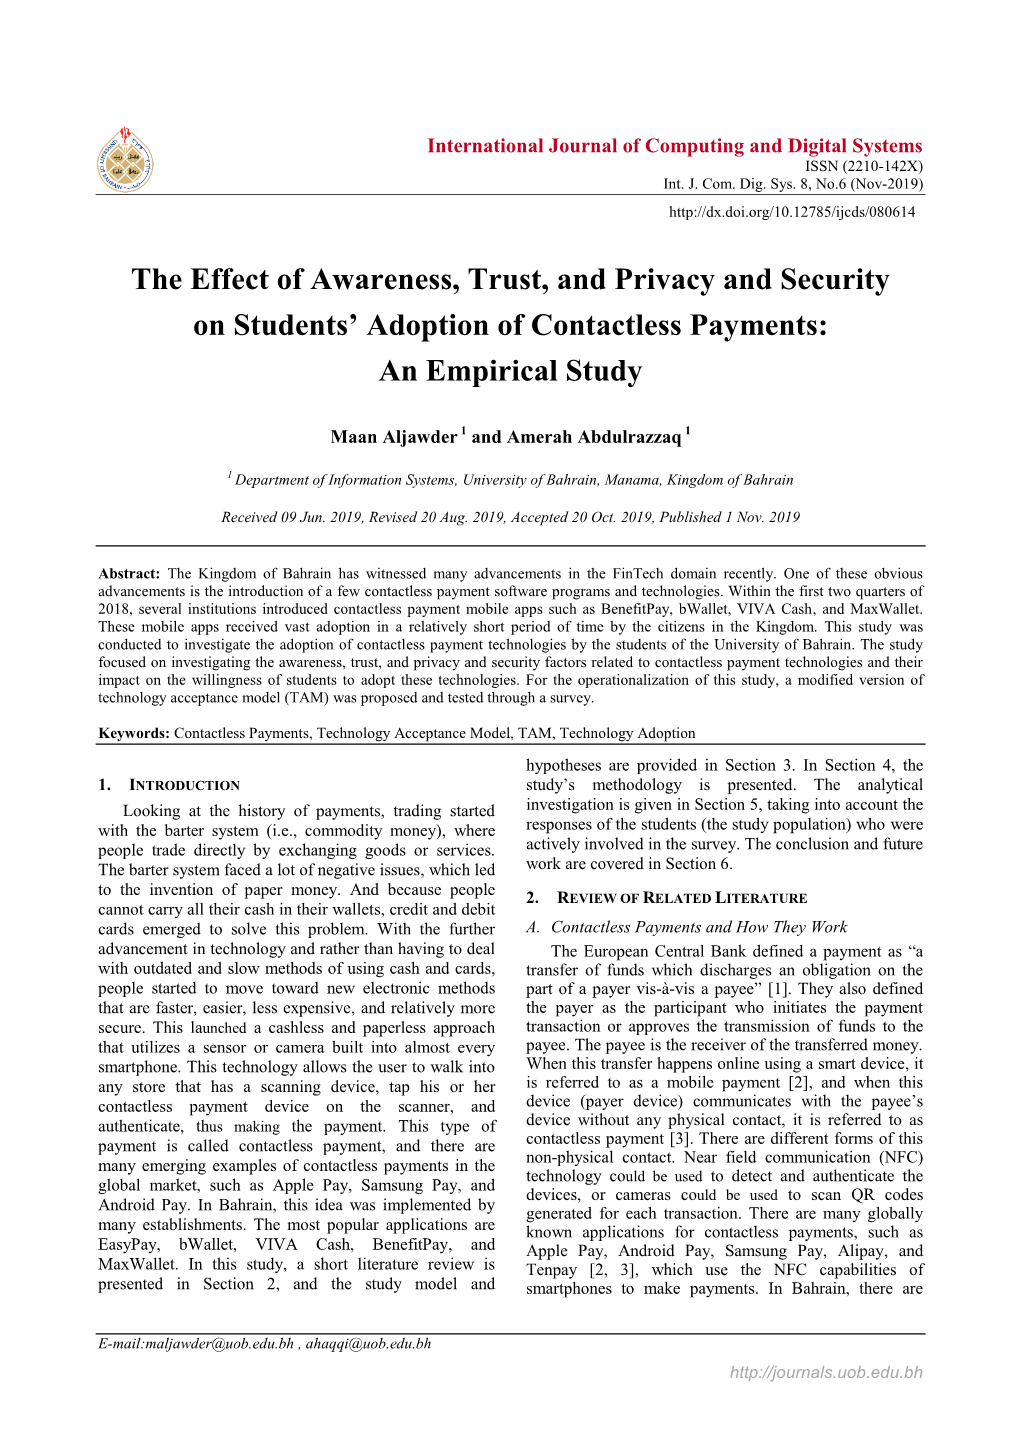 The Effect of Awareness, Trust, and Privacy and Security on Students’ Adoption of Contactless Payments: an Empirical Study